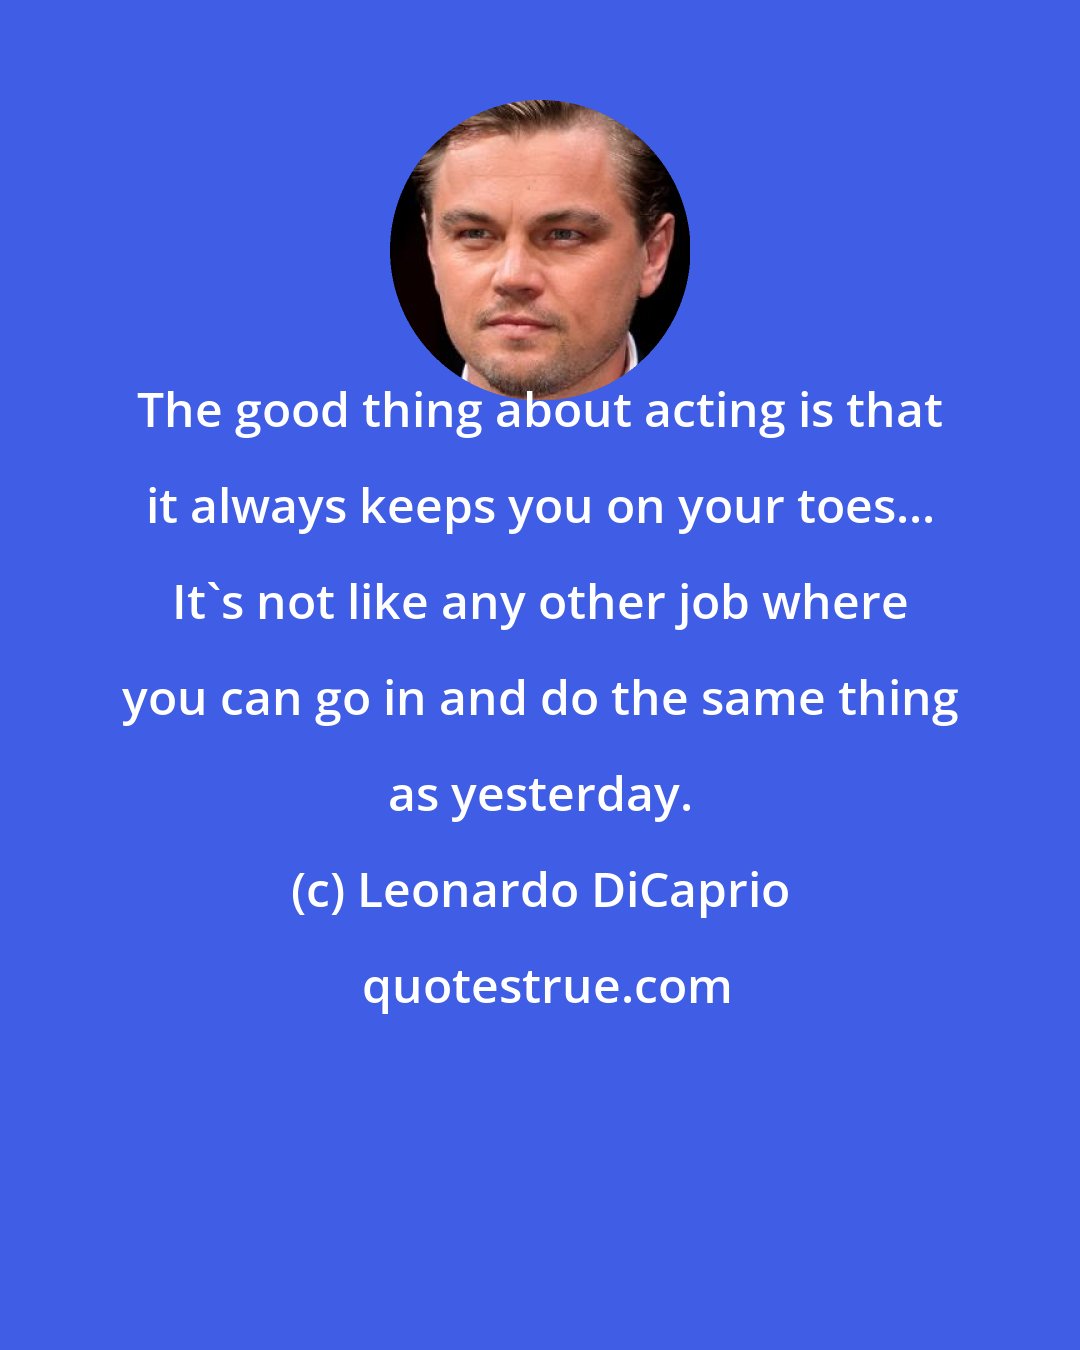 Leonardo DiCaprio: The good thing about acting is that it always keeps you on your toes... It's not like any other job where you can go in and do the same thing as yesterday.